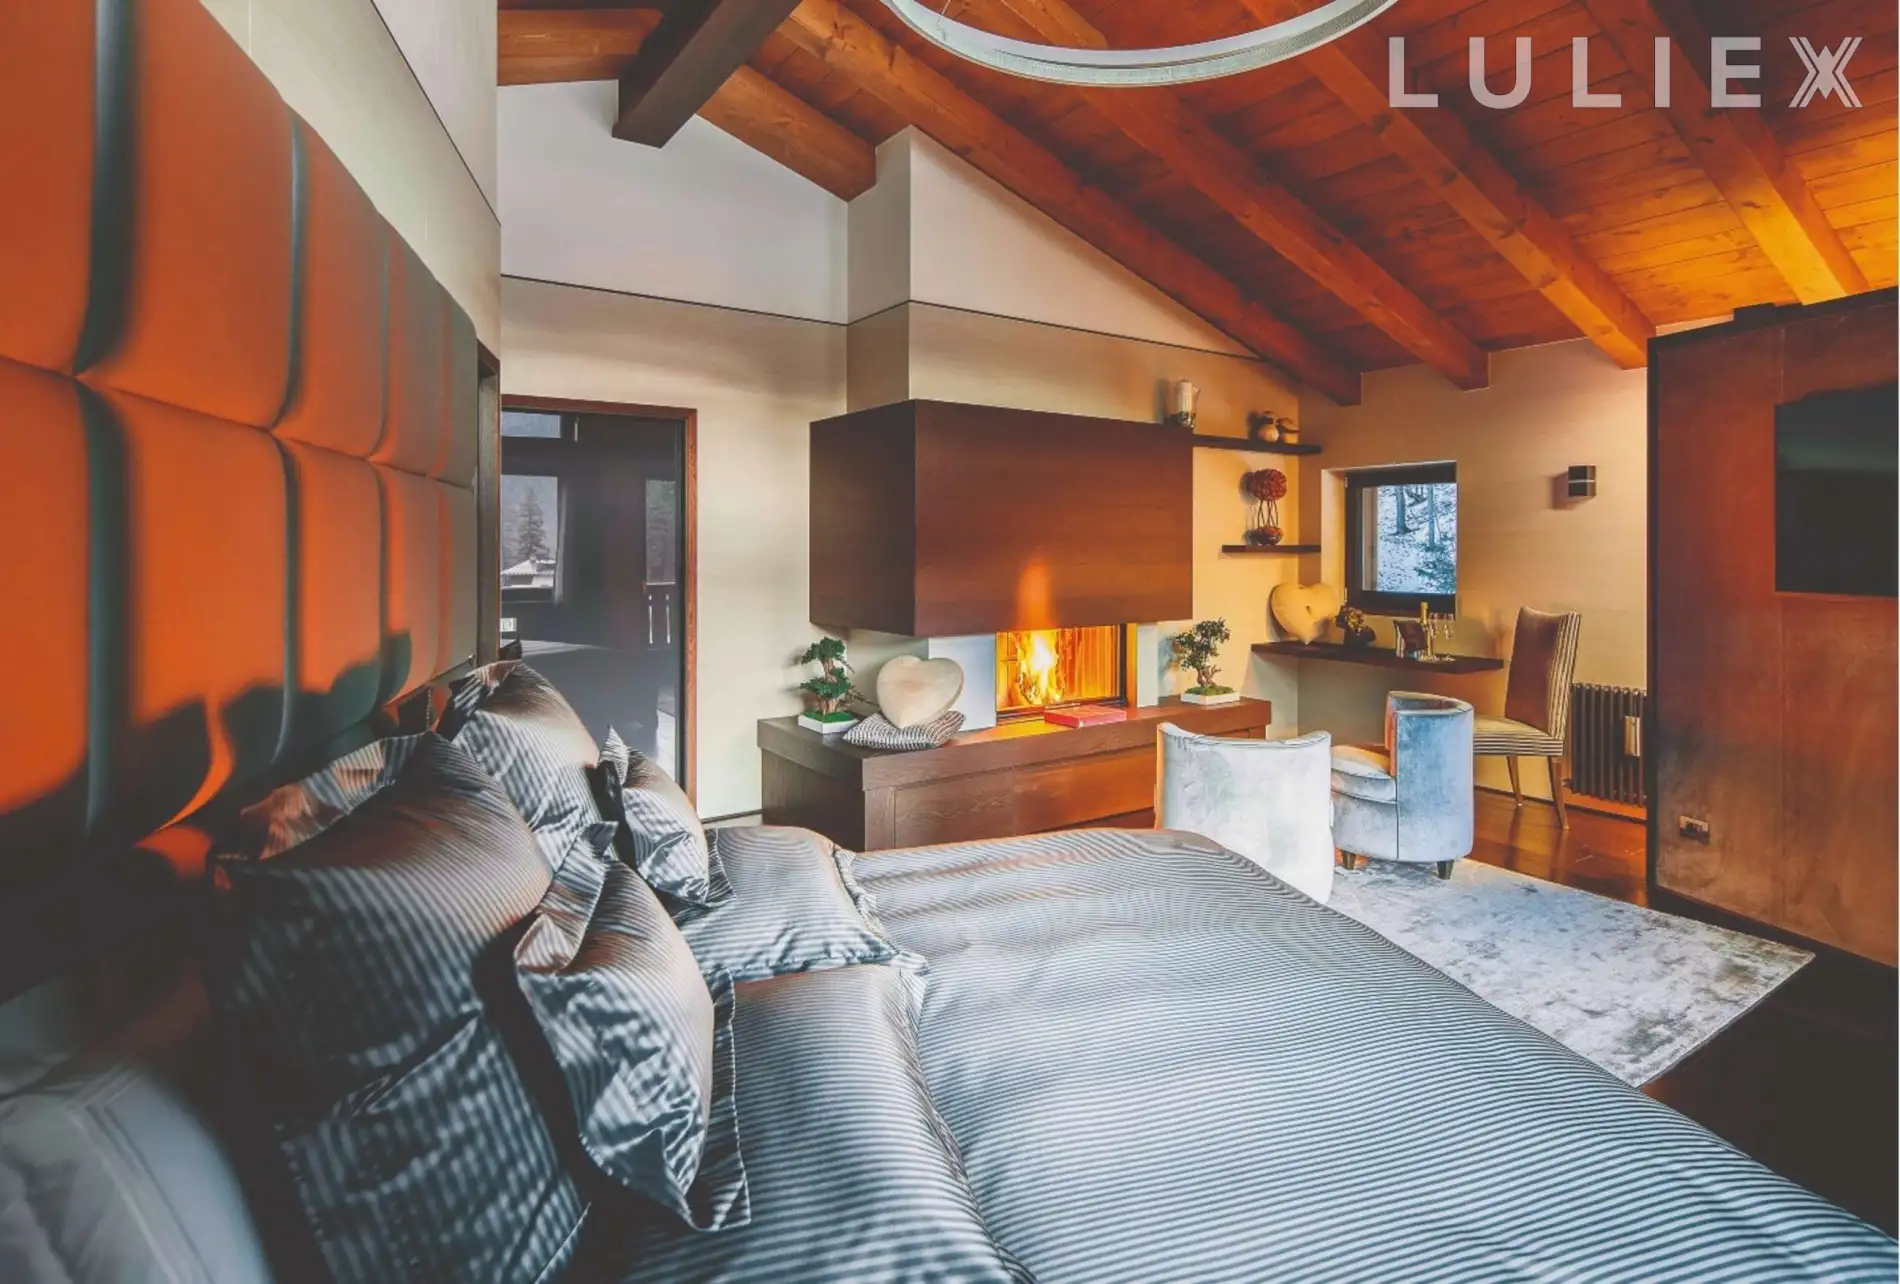 CHALET LUCY